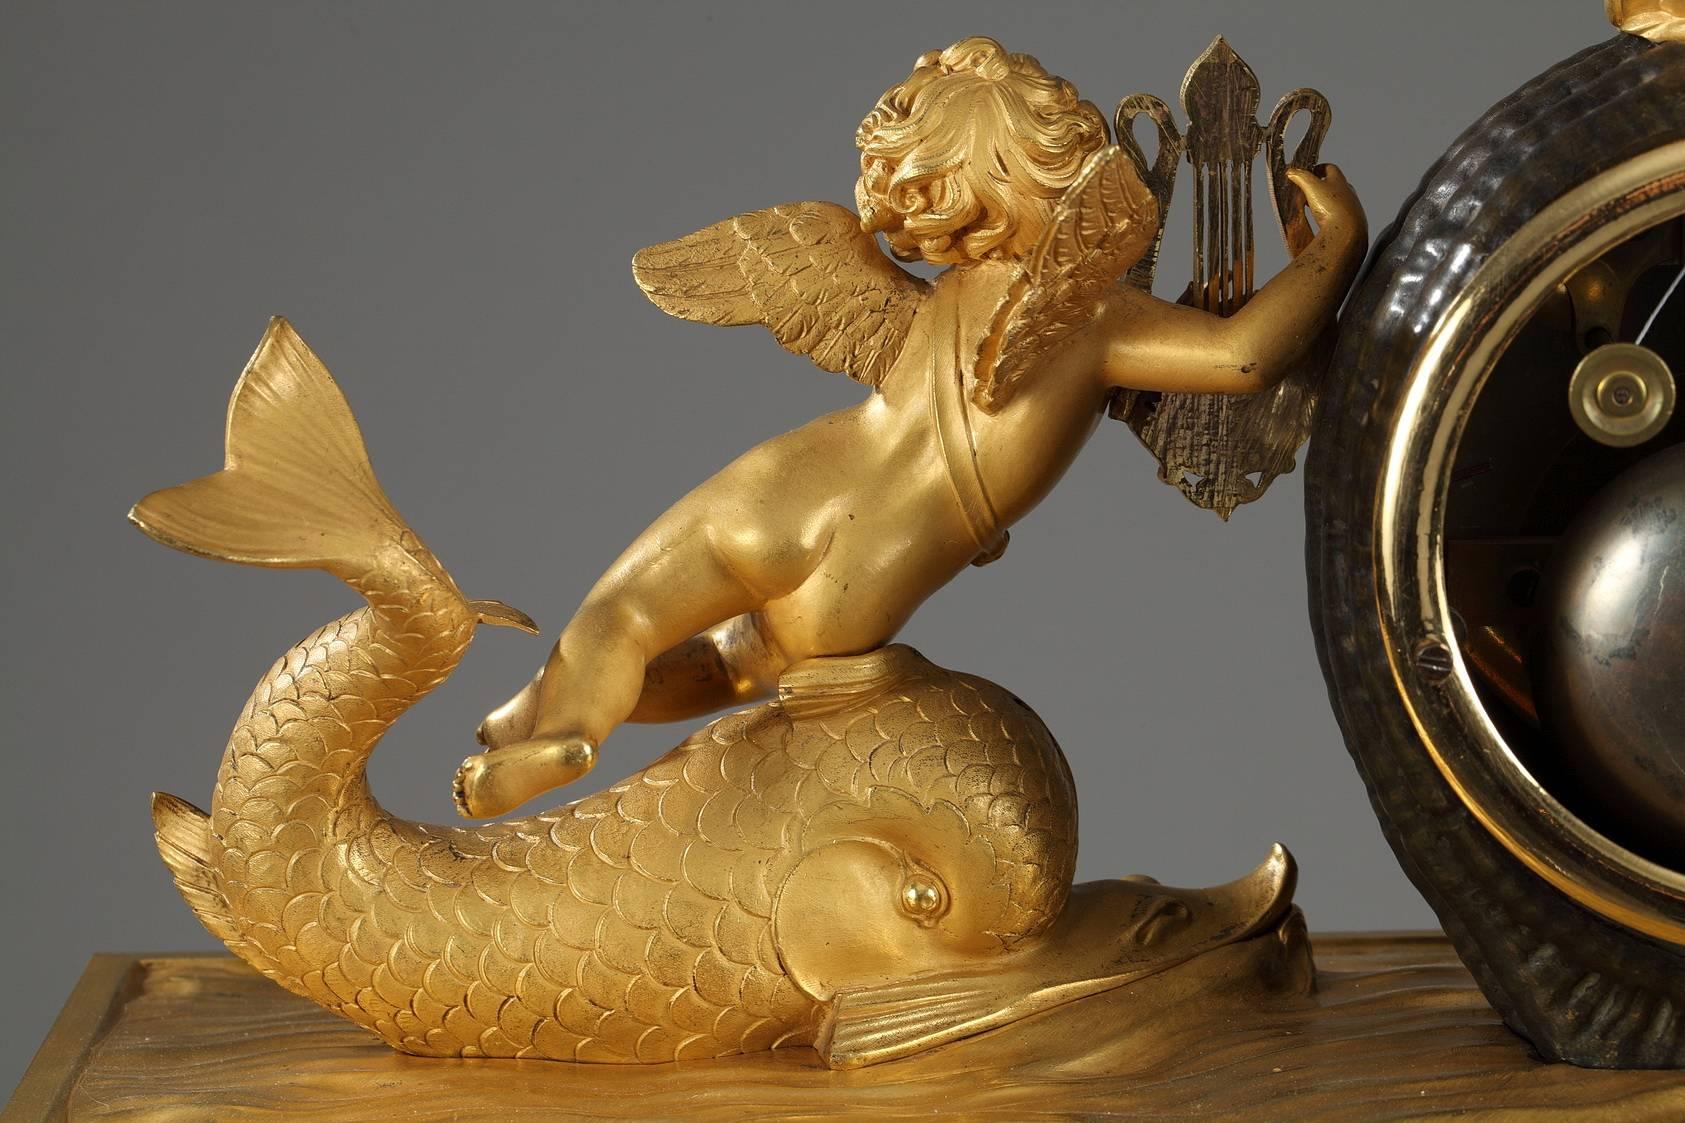 Early 19th Century Restauration Gilt and Patinated Bronze Clock Featuring Hippolytus' Chariot